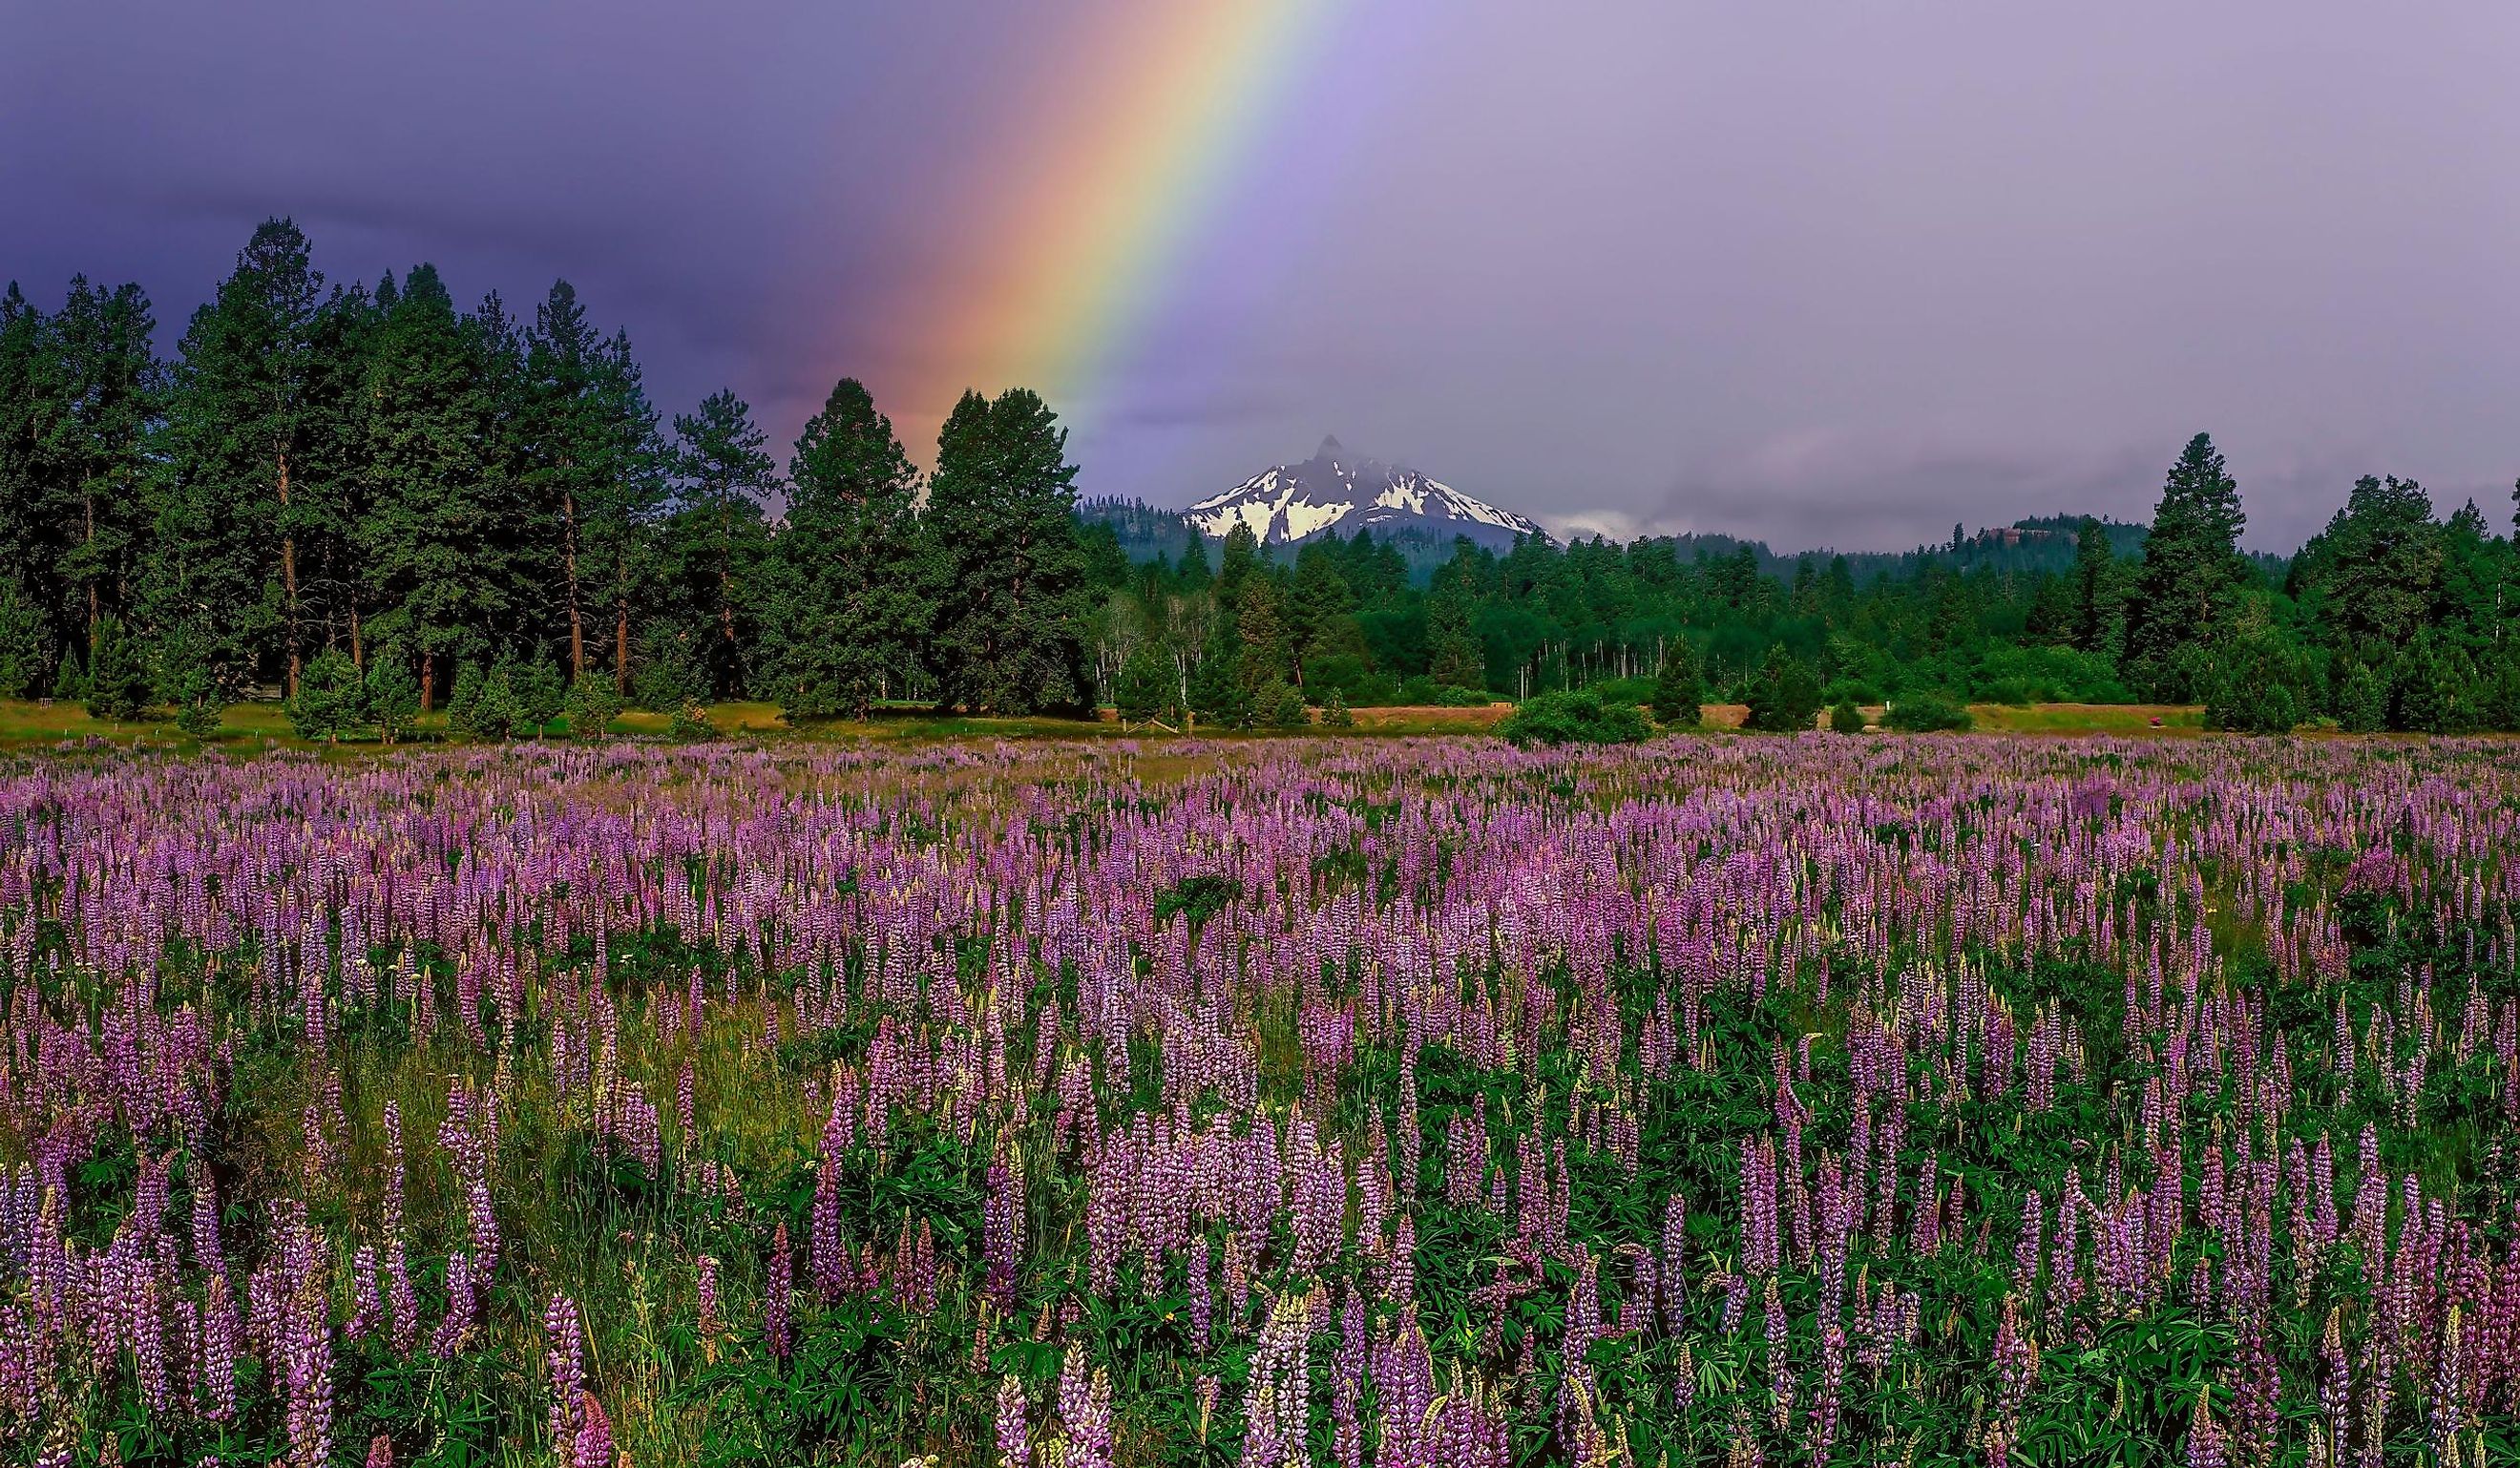 A field of lupine flowers in the spring season with Mt. Washington in the background near Sisters, Oregon.